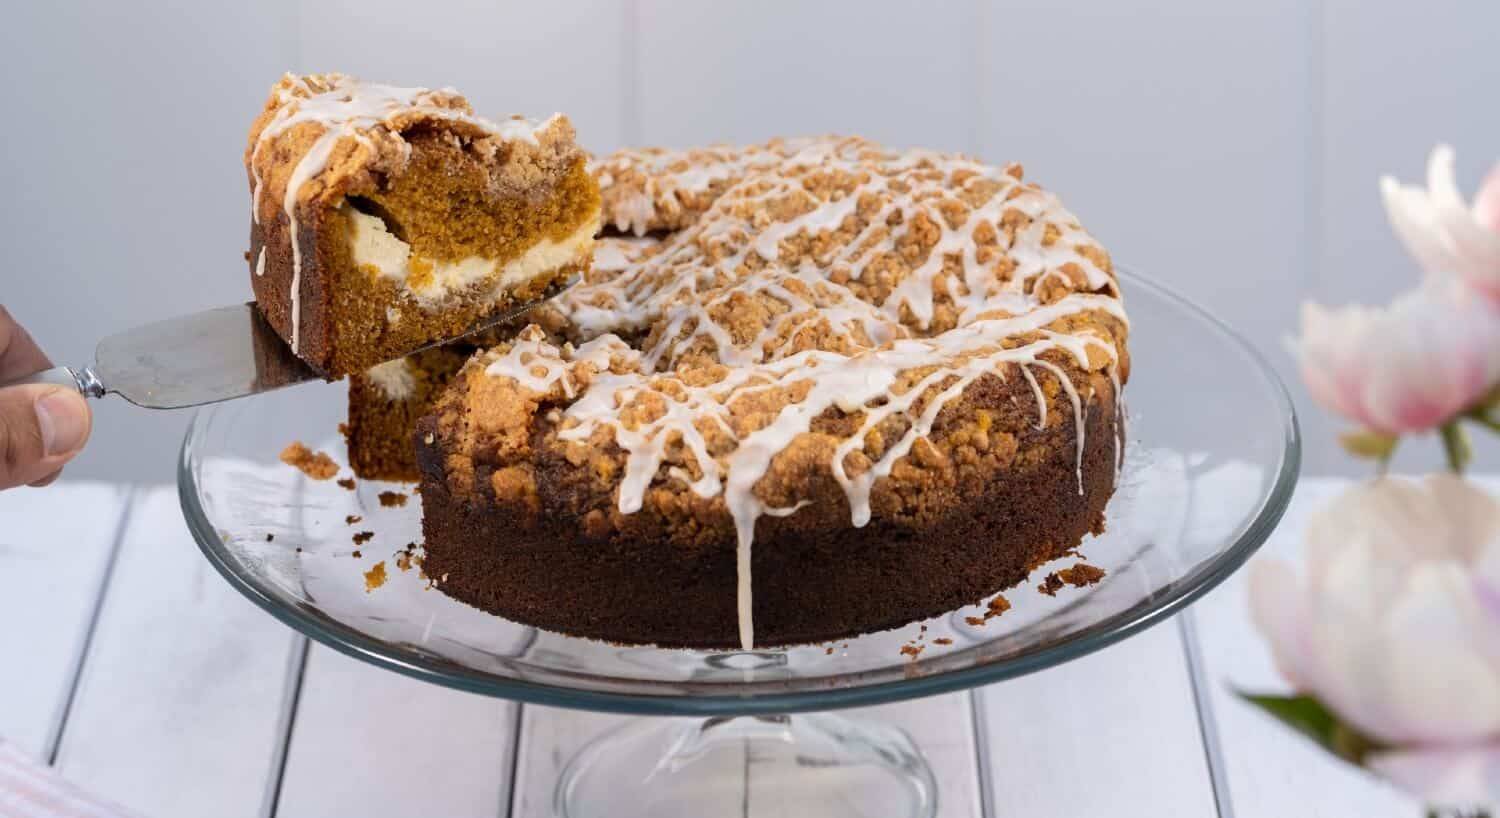 Round coffee cake drizzled with frosting sitting on a glass cake platter